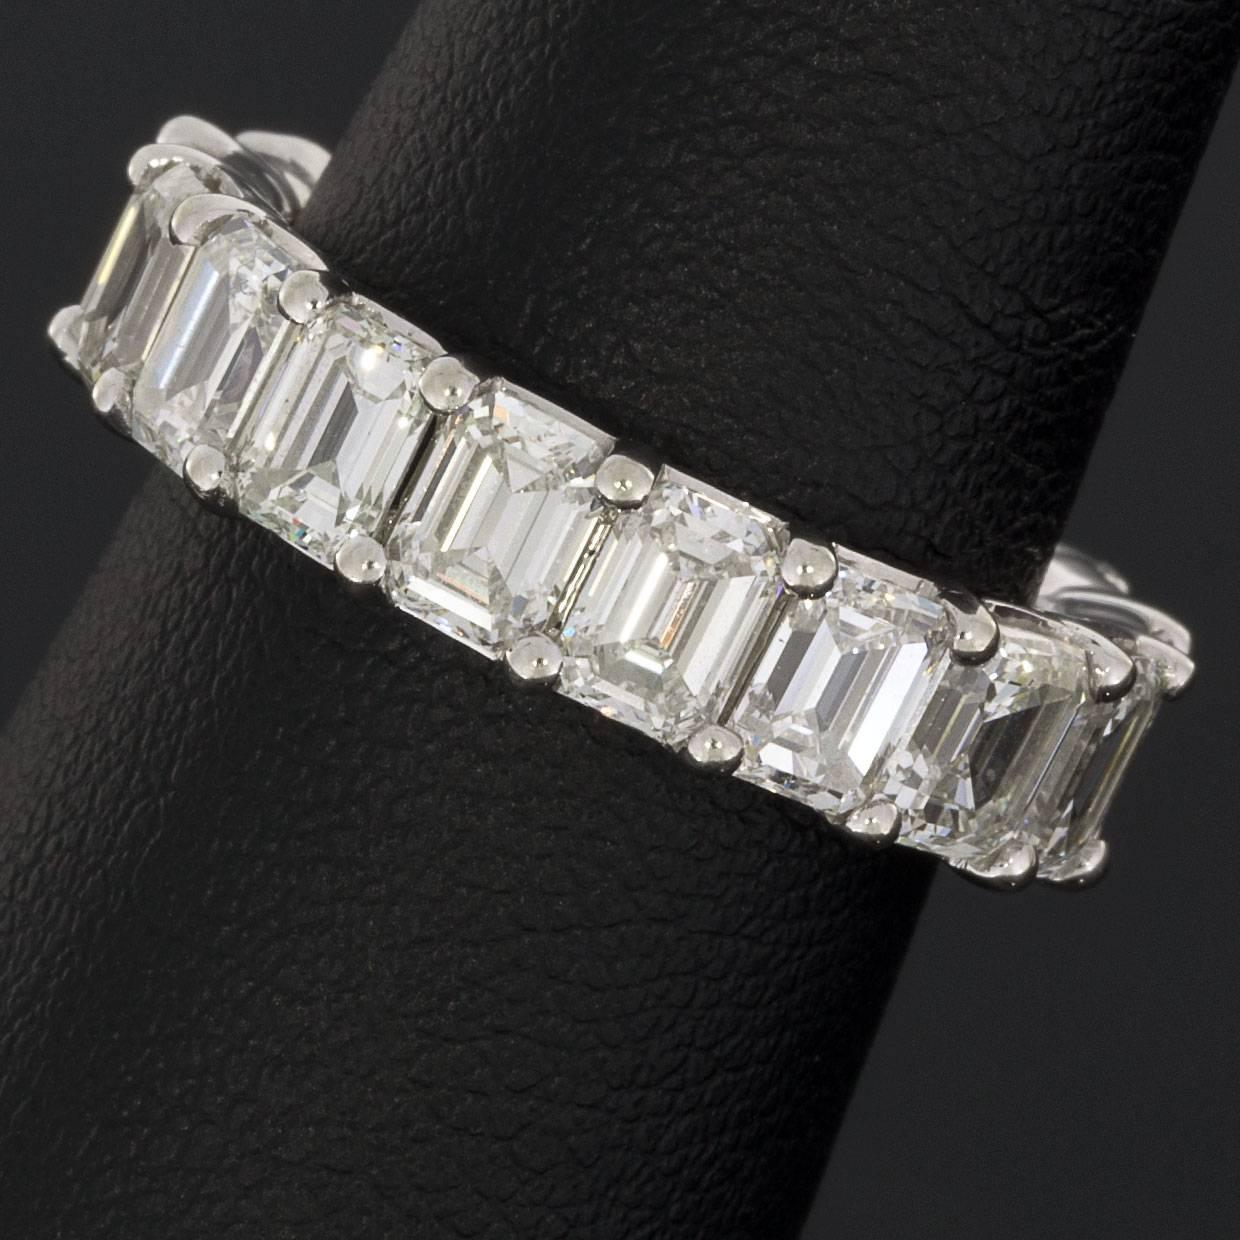 Magnificent Emerald Cut Diamond White Gold Eternity Band Ring 1